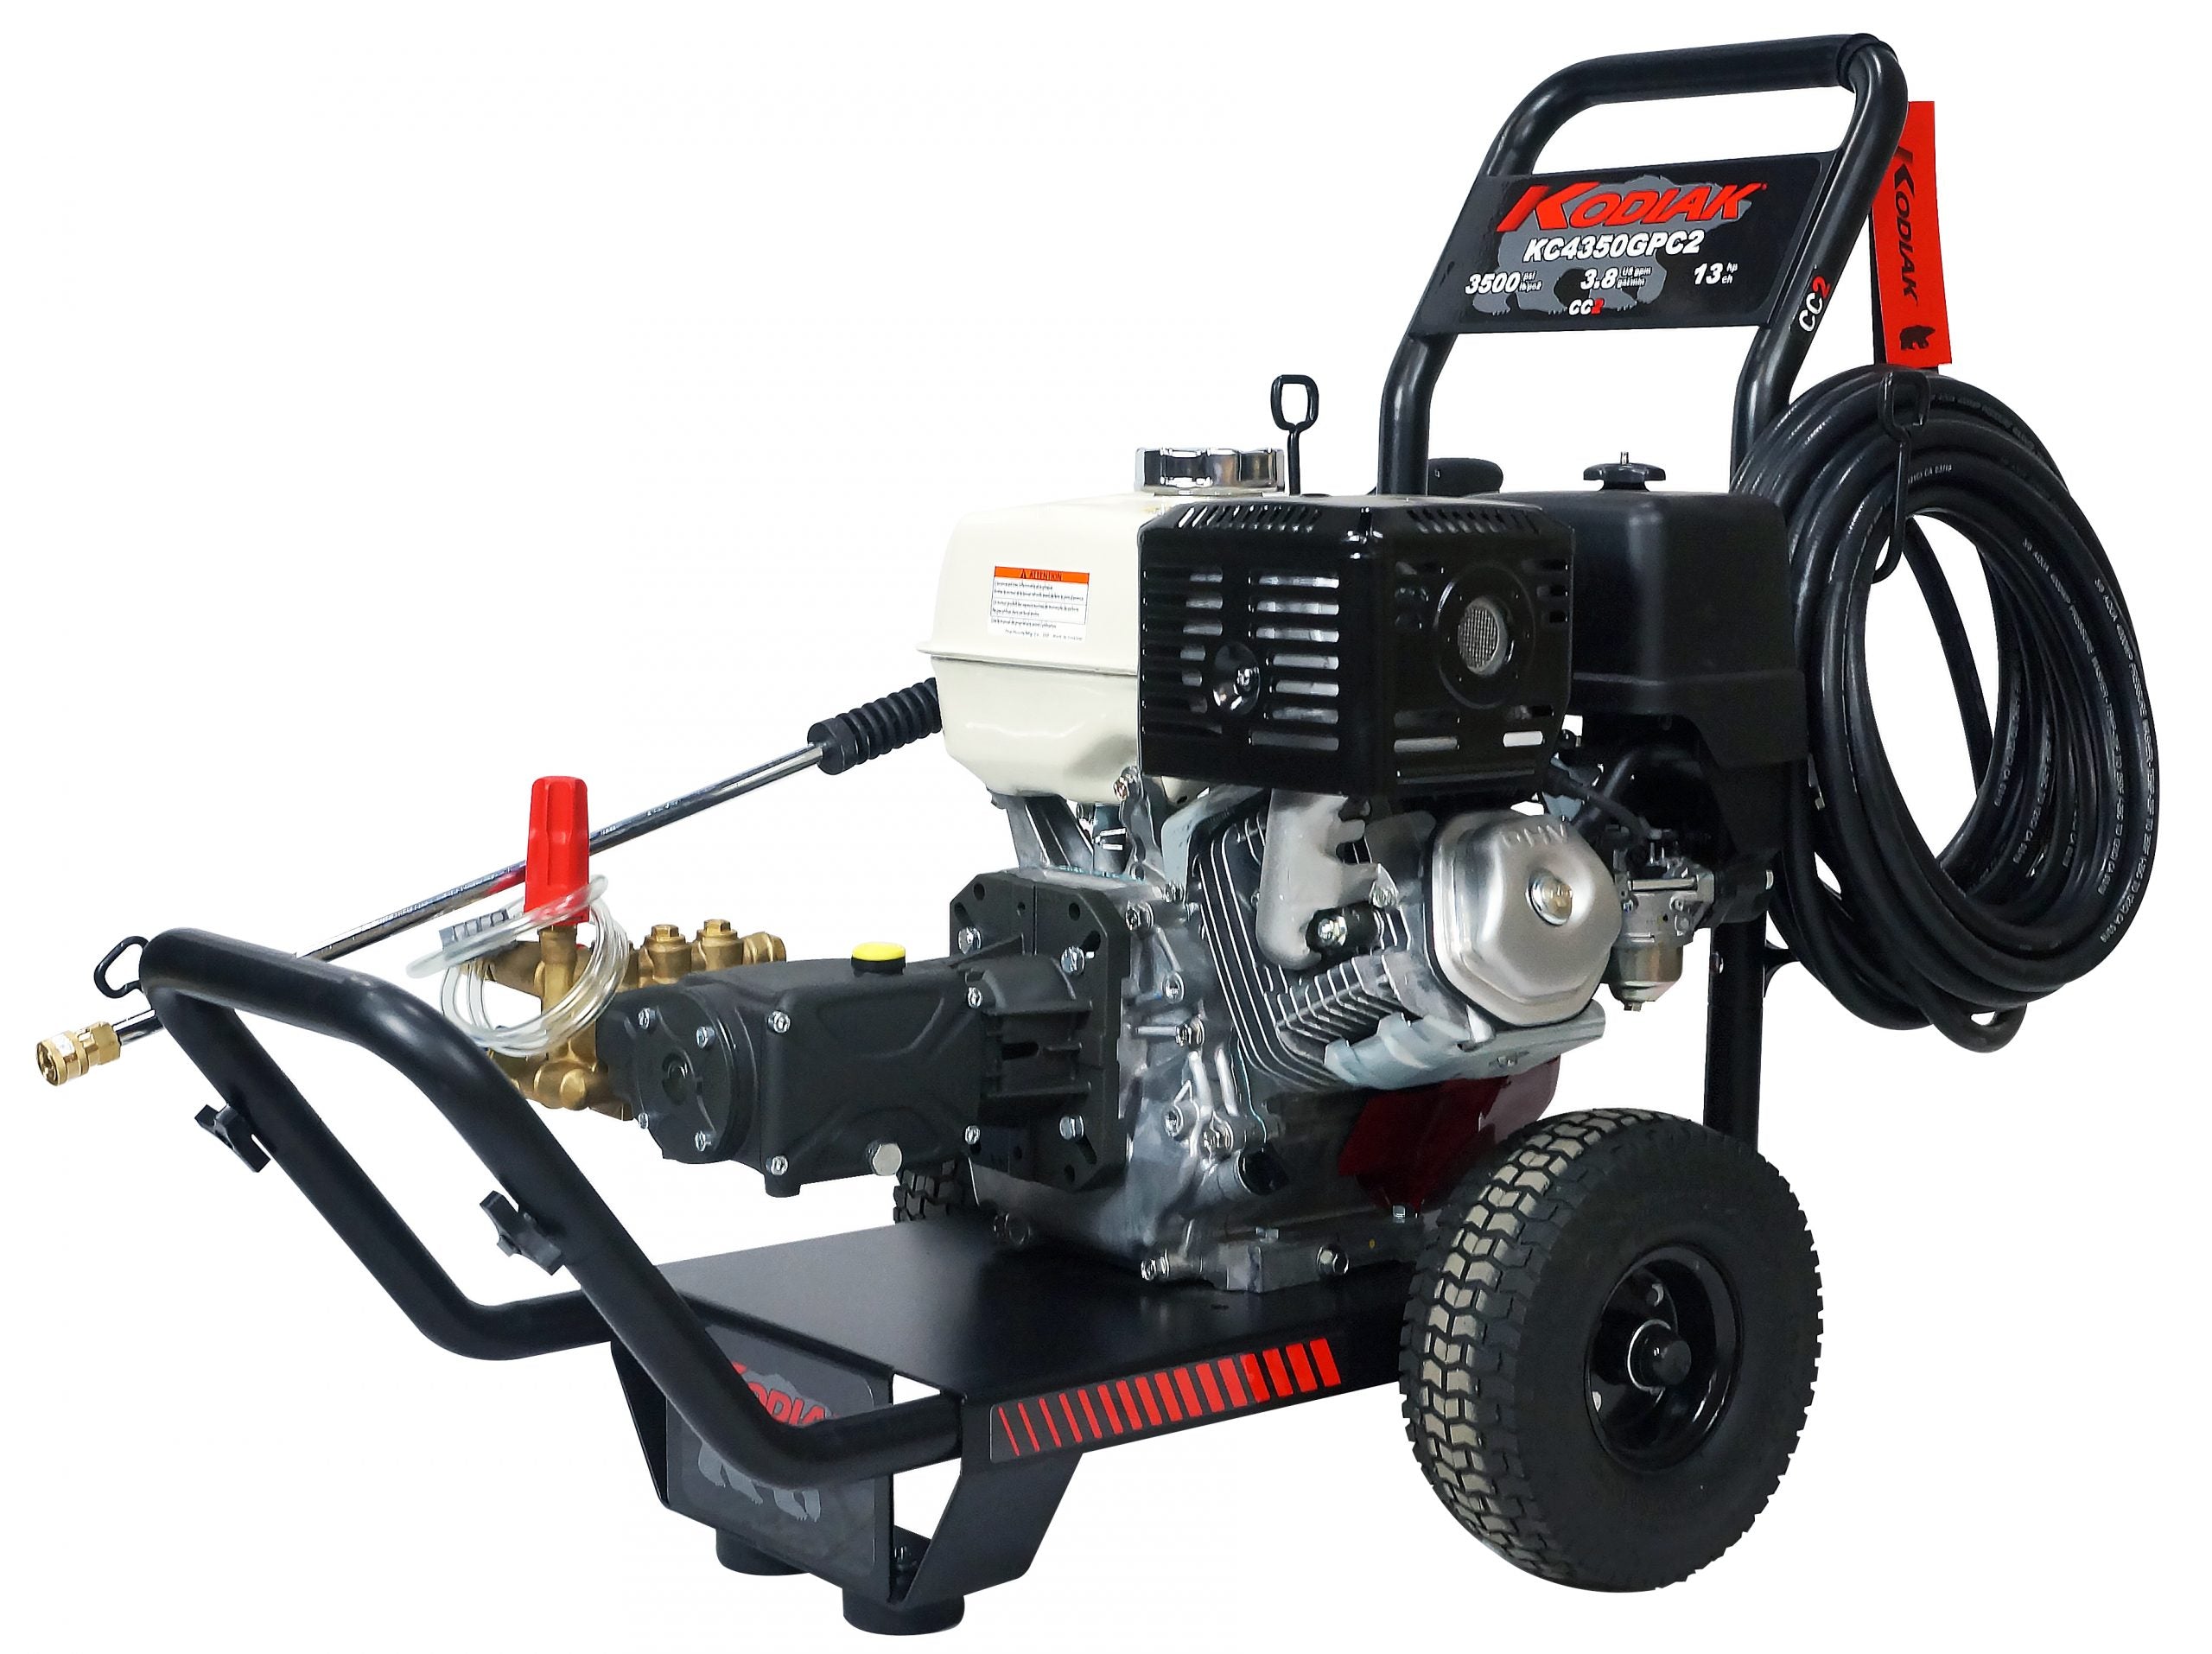 Cold Water Industrial Grade Honda GX390 Gas Engine Pressure Washer - 4000 PSI at 4.0 GPM